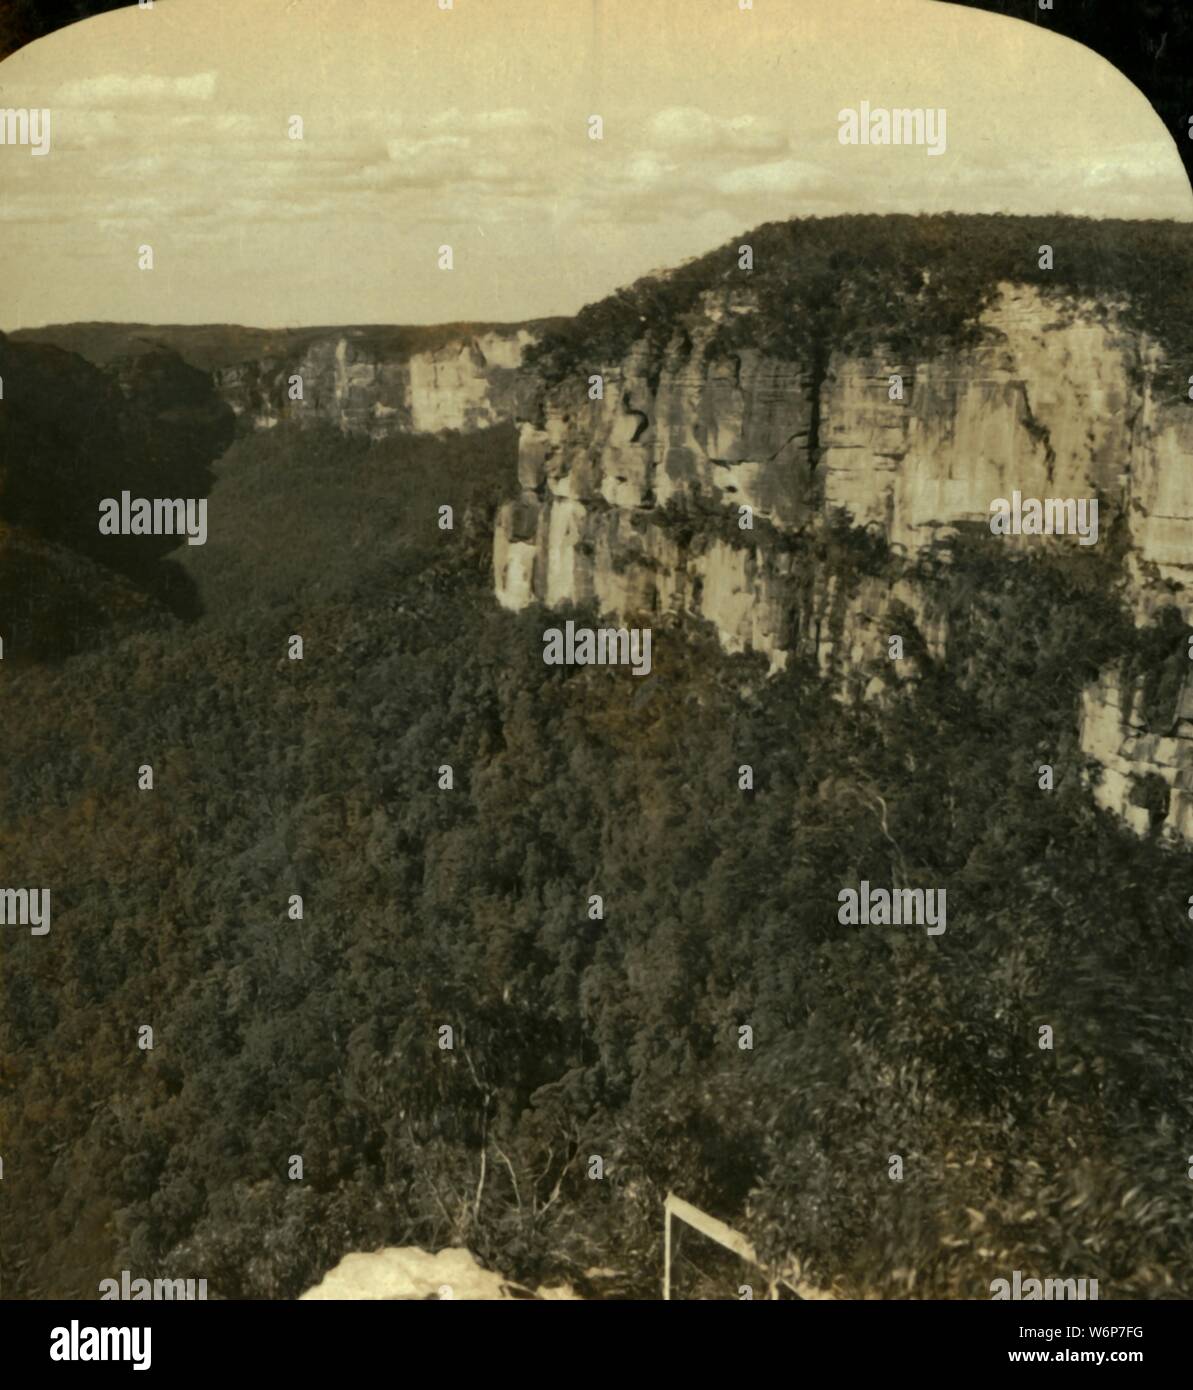 'The Grose Valley, Blue Mountains, N.S.W., Australia', 1909. 'Extensive view of the abrupt cliffs near Govett's Leap'. One of a set of stereocard views by George Rose, boxed as &quot;Studies through the Stereoscope&quot;, to be viewed on a Sun Sculpture stereoscope made by Underwood &amp; Underwood. [The Rose Stereograph Company, Melbourne, Sydney, Wellington &amp; London, c1909] Stock Photo